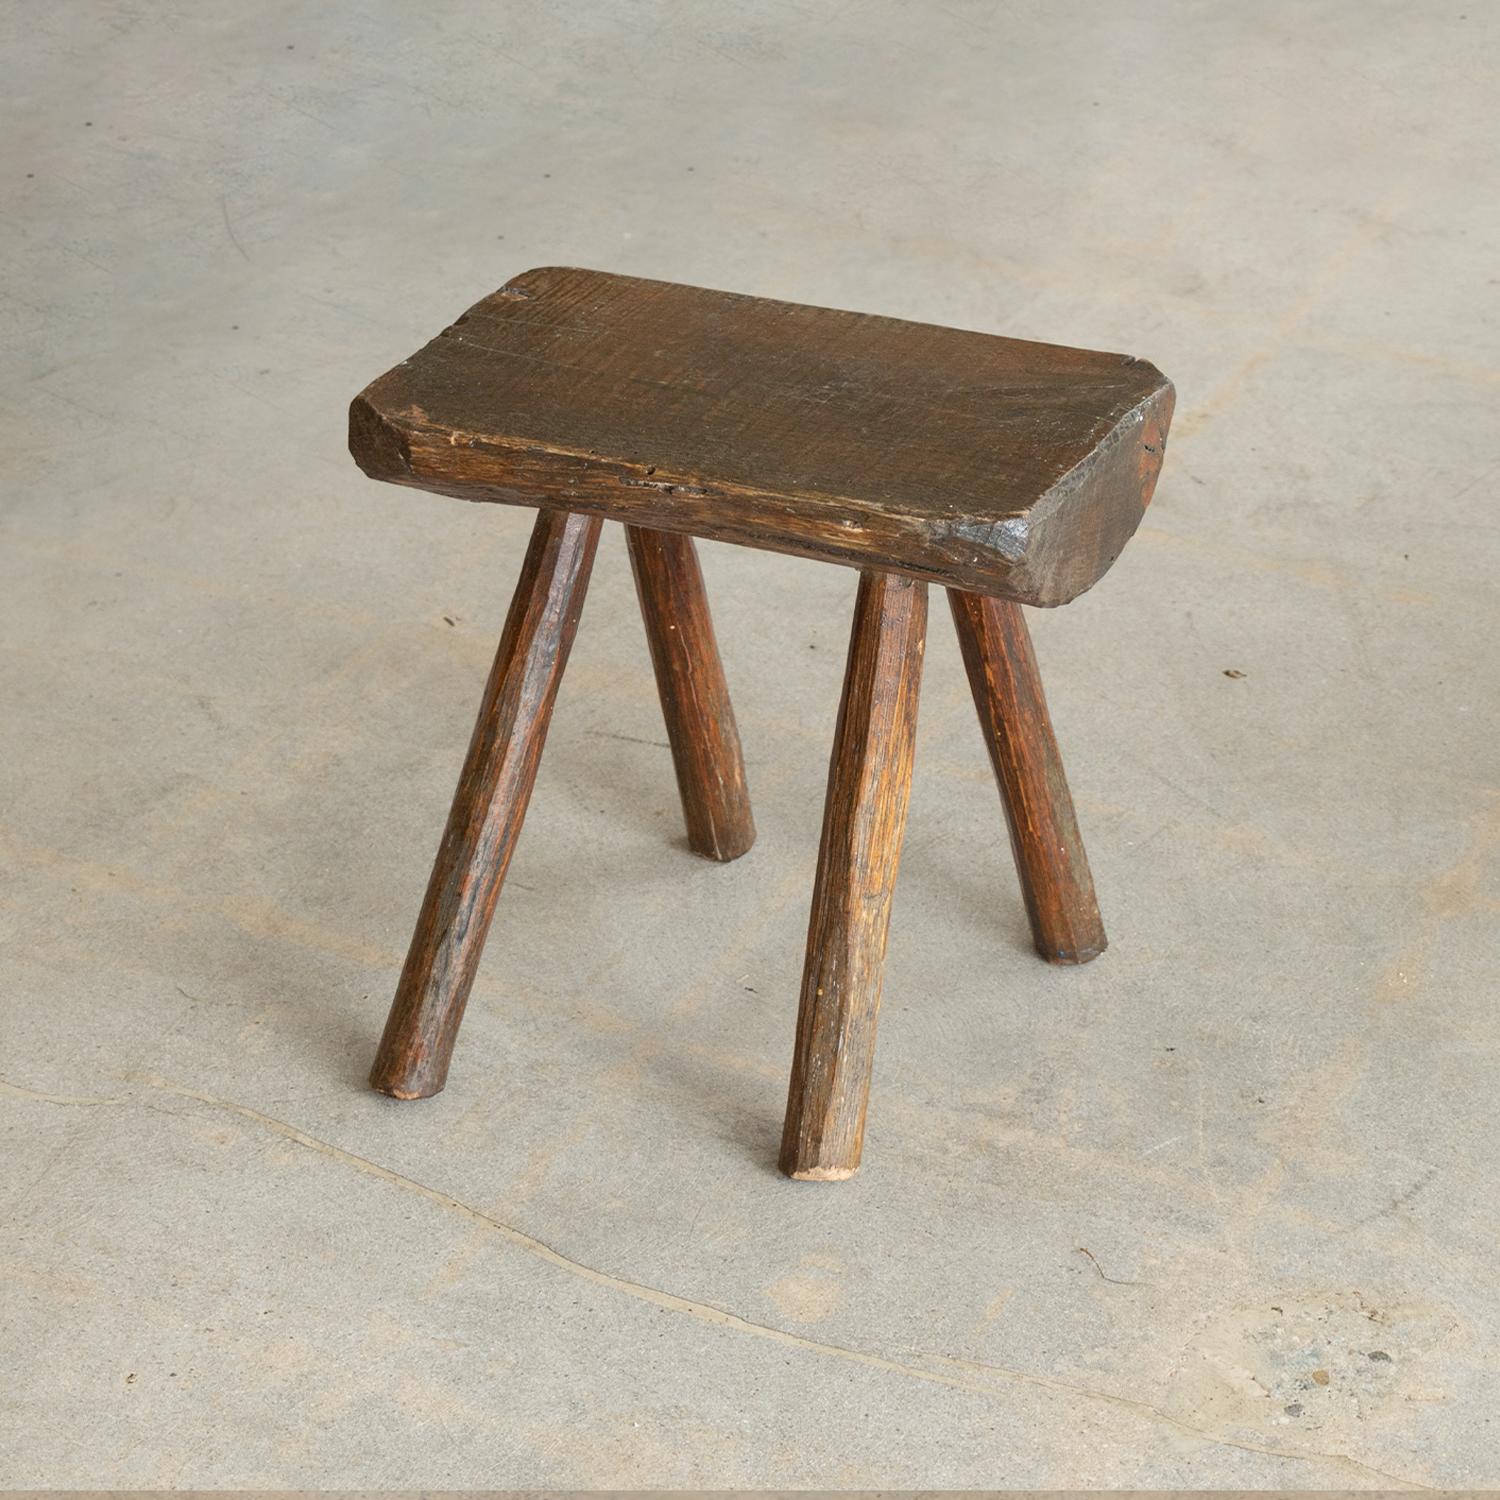 Great chunky oak wood stool from France, 1970s. Organic rectangular top, with four hand carved angled legs. Lovely grain in wood and original finish shows nice age and patina.